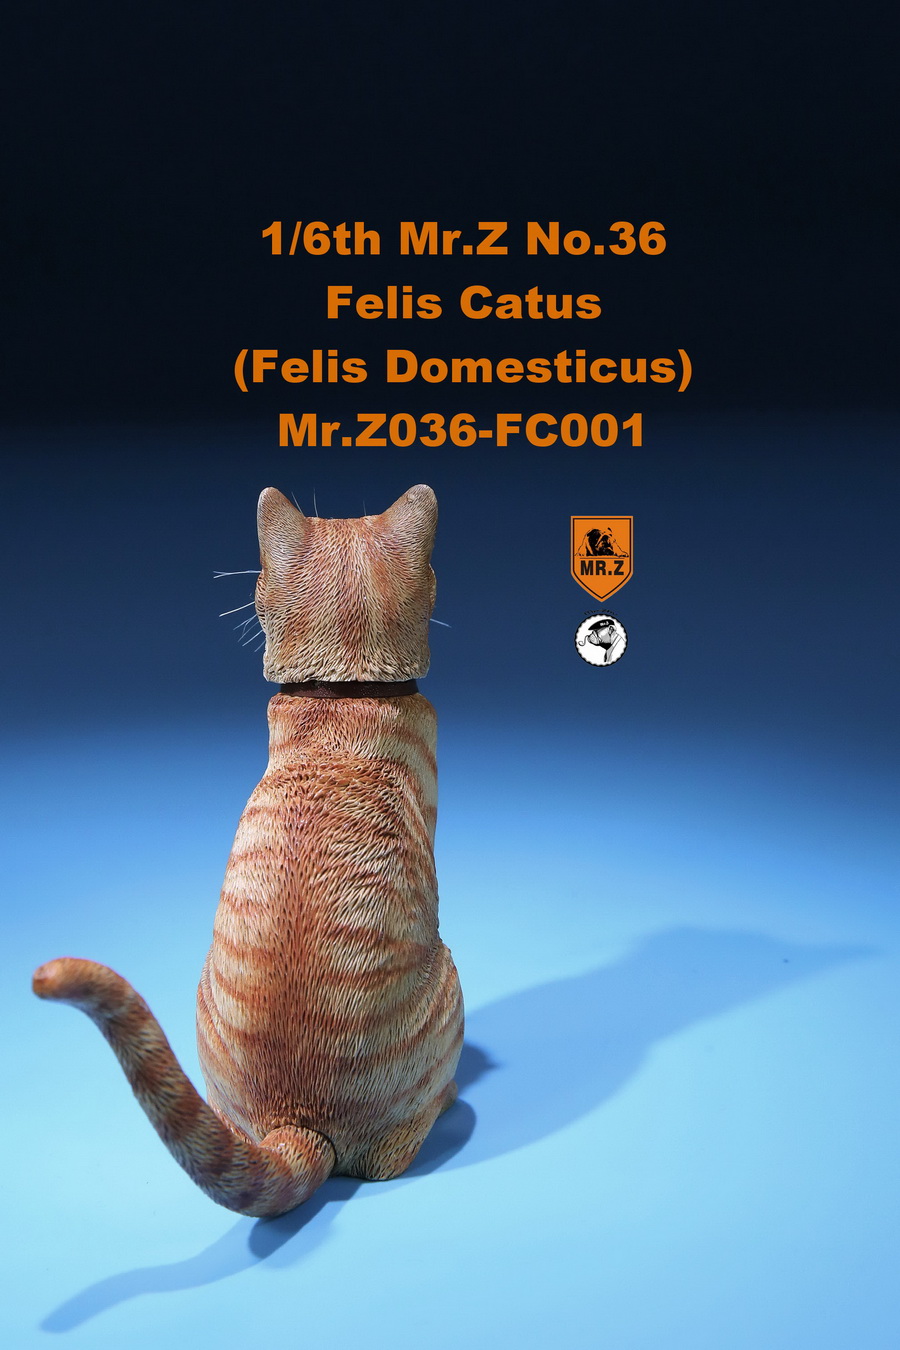 DomesticCat - NEW PRODUCT: Mr. Z: 1/6 Simulation Animal Model 36th - Domestic Cat Complete 6 Colors 15015410